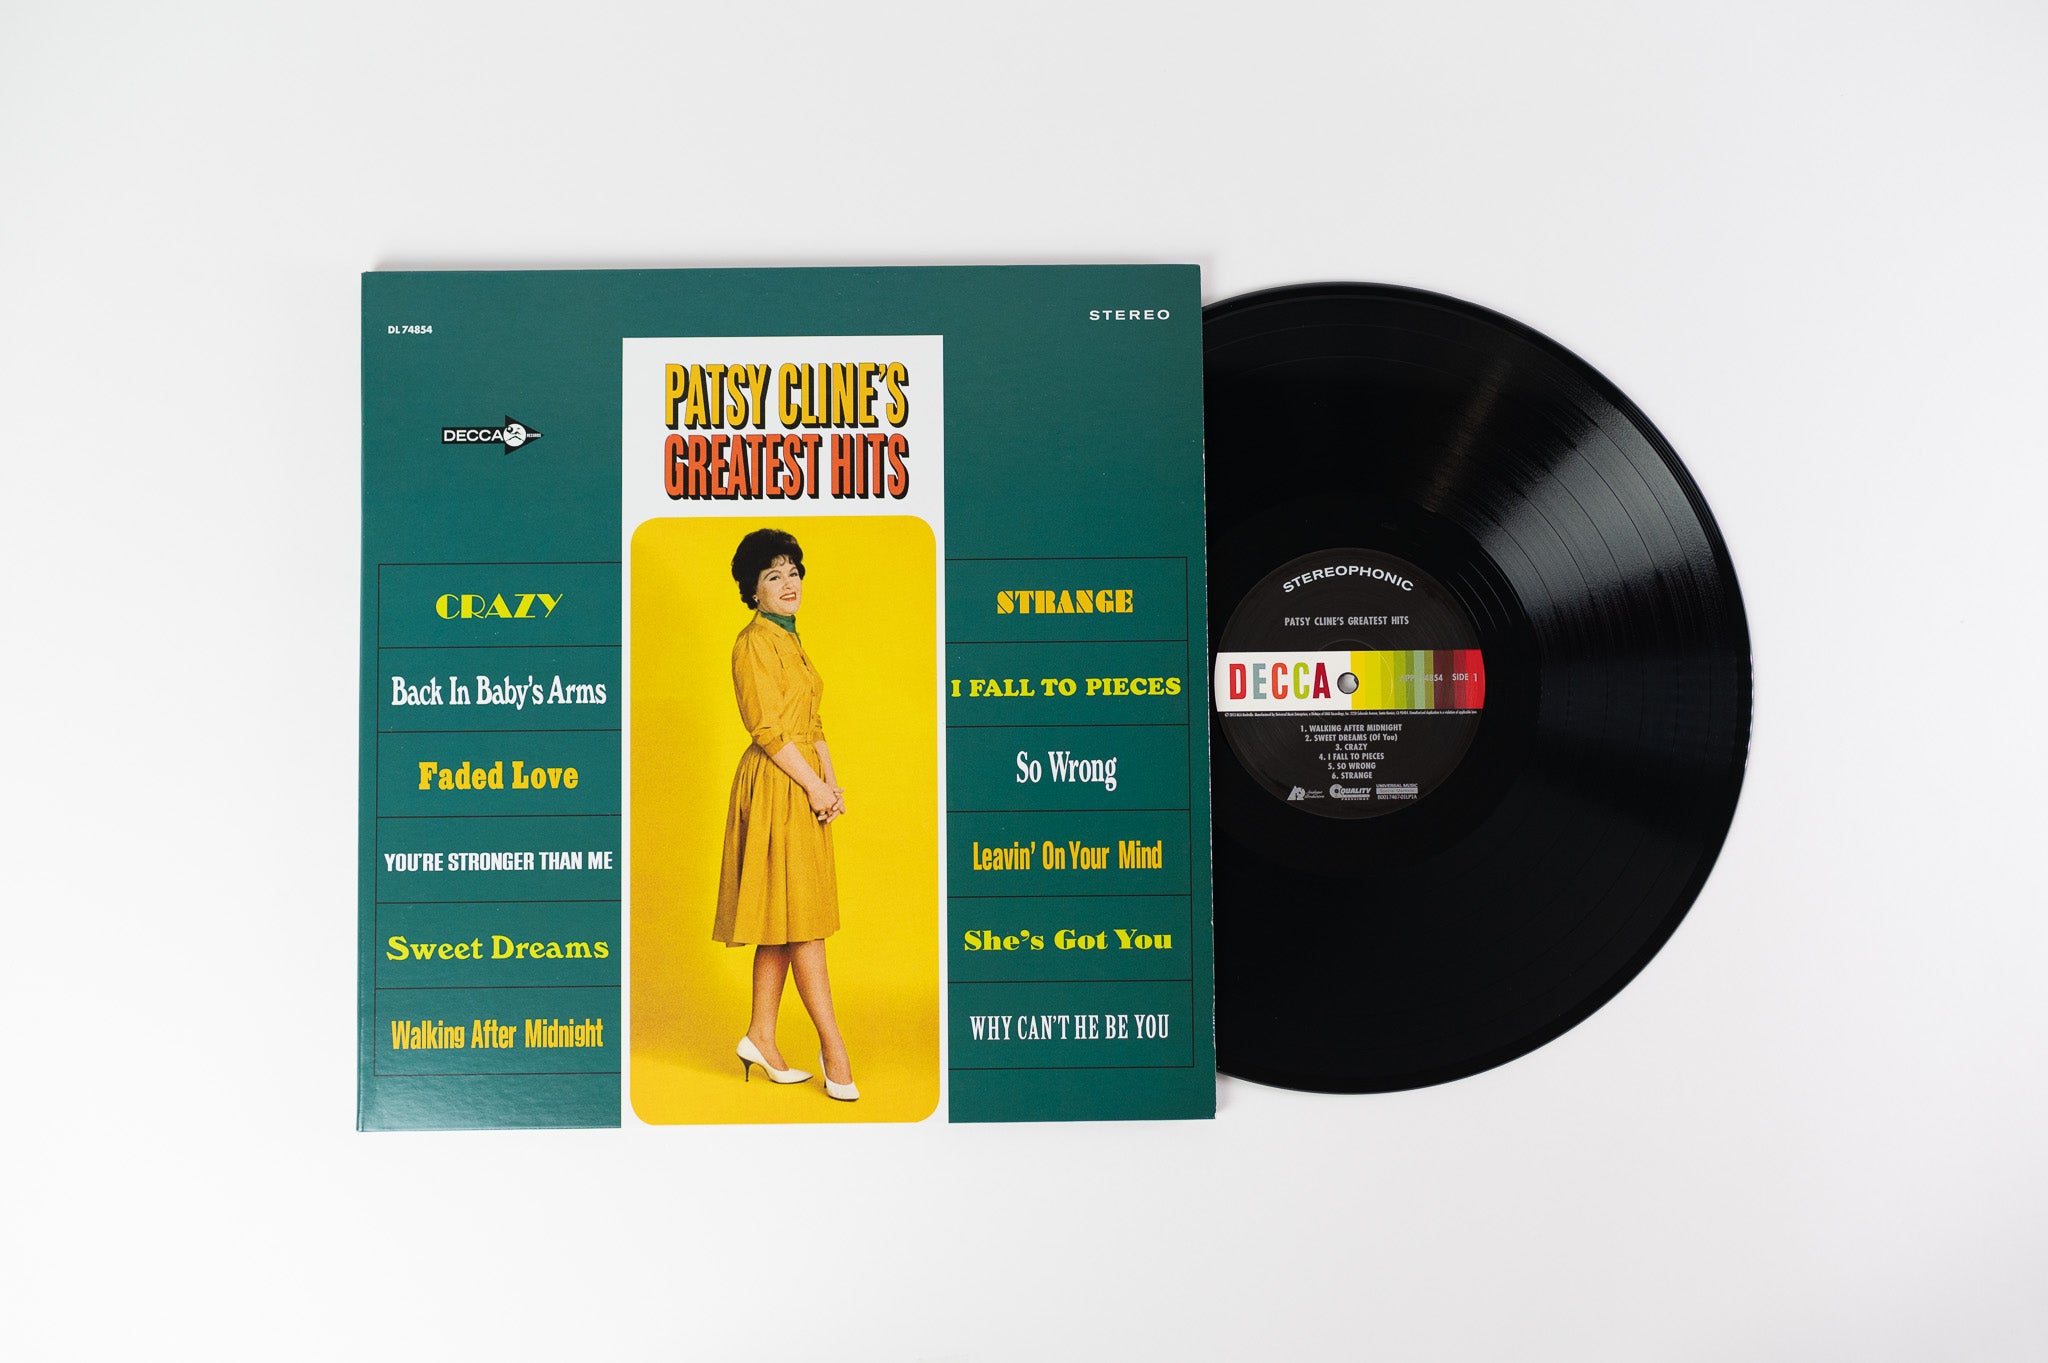 Patsy Cline - Greatest Hits on Decca Analogue Productions Reissue